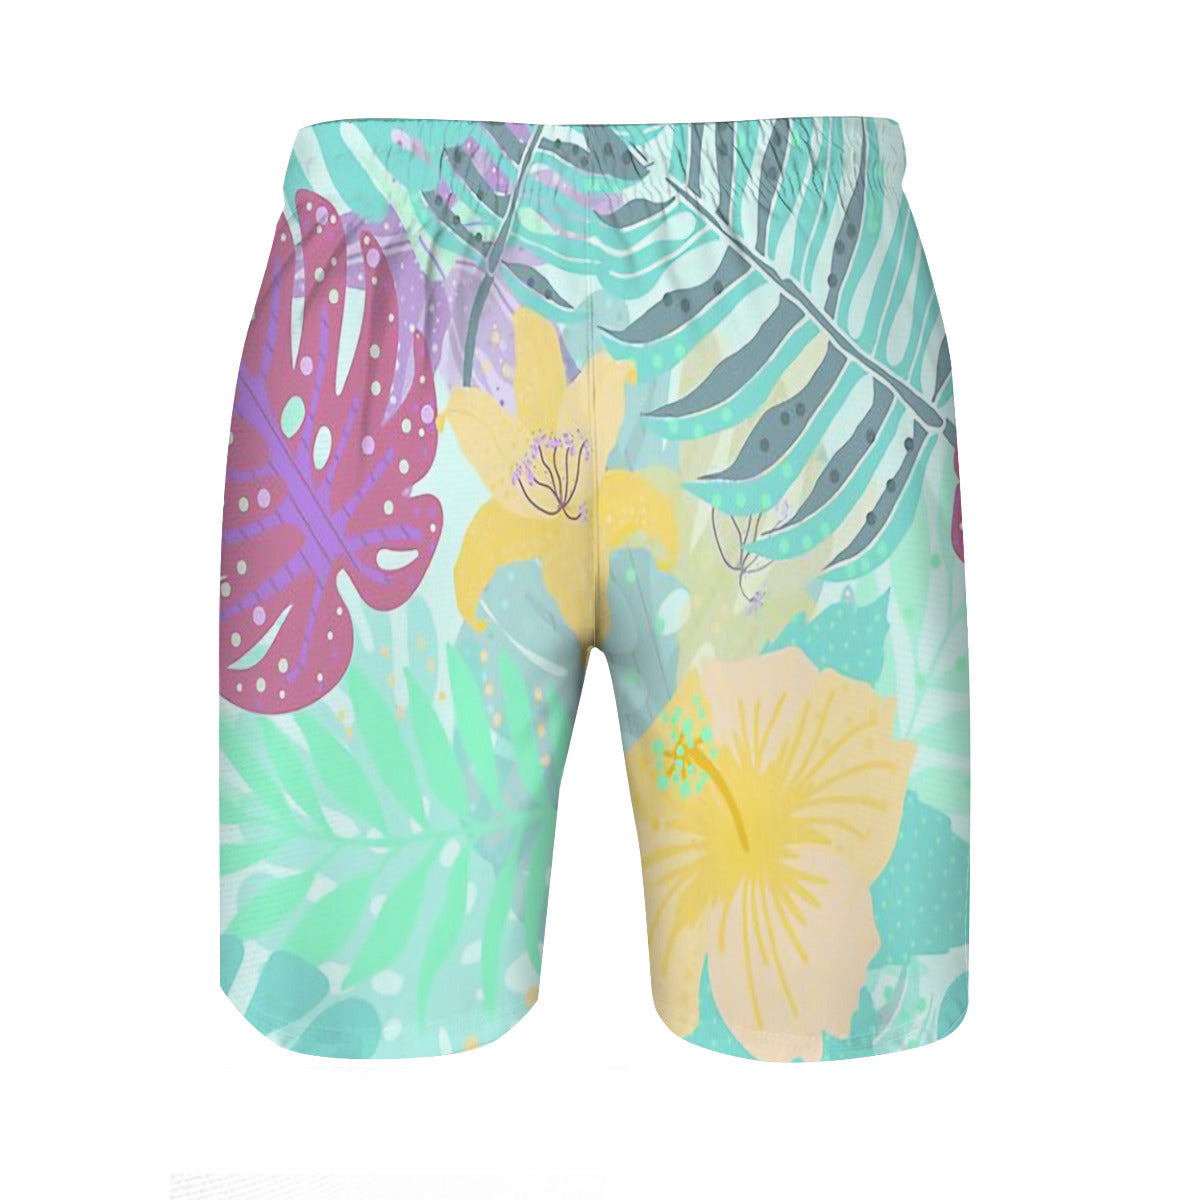 Turquoise Teal Abstract Aloha Tropical Foliage Pattern Graphic Men's Swim Trunks No.CGM6Y3